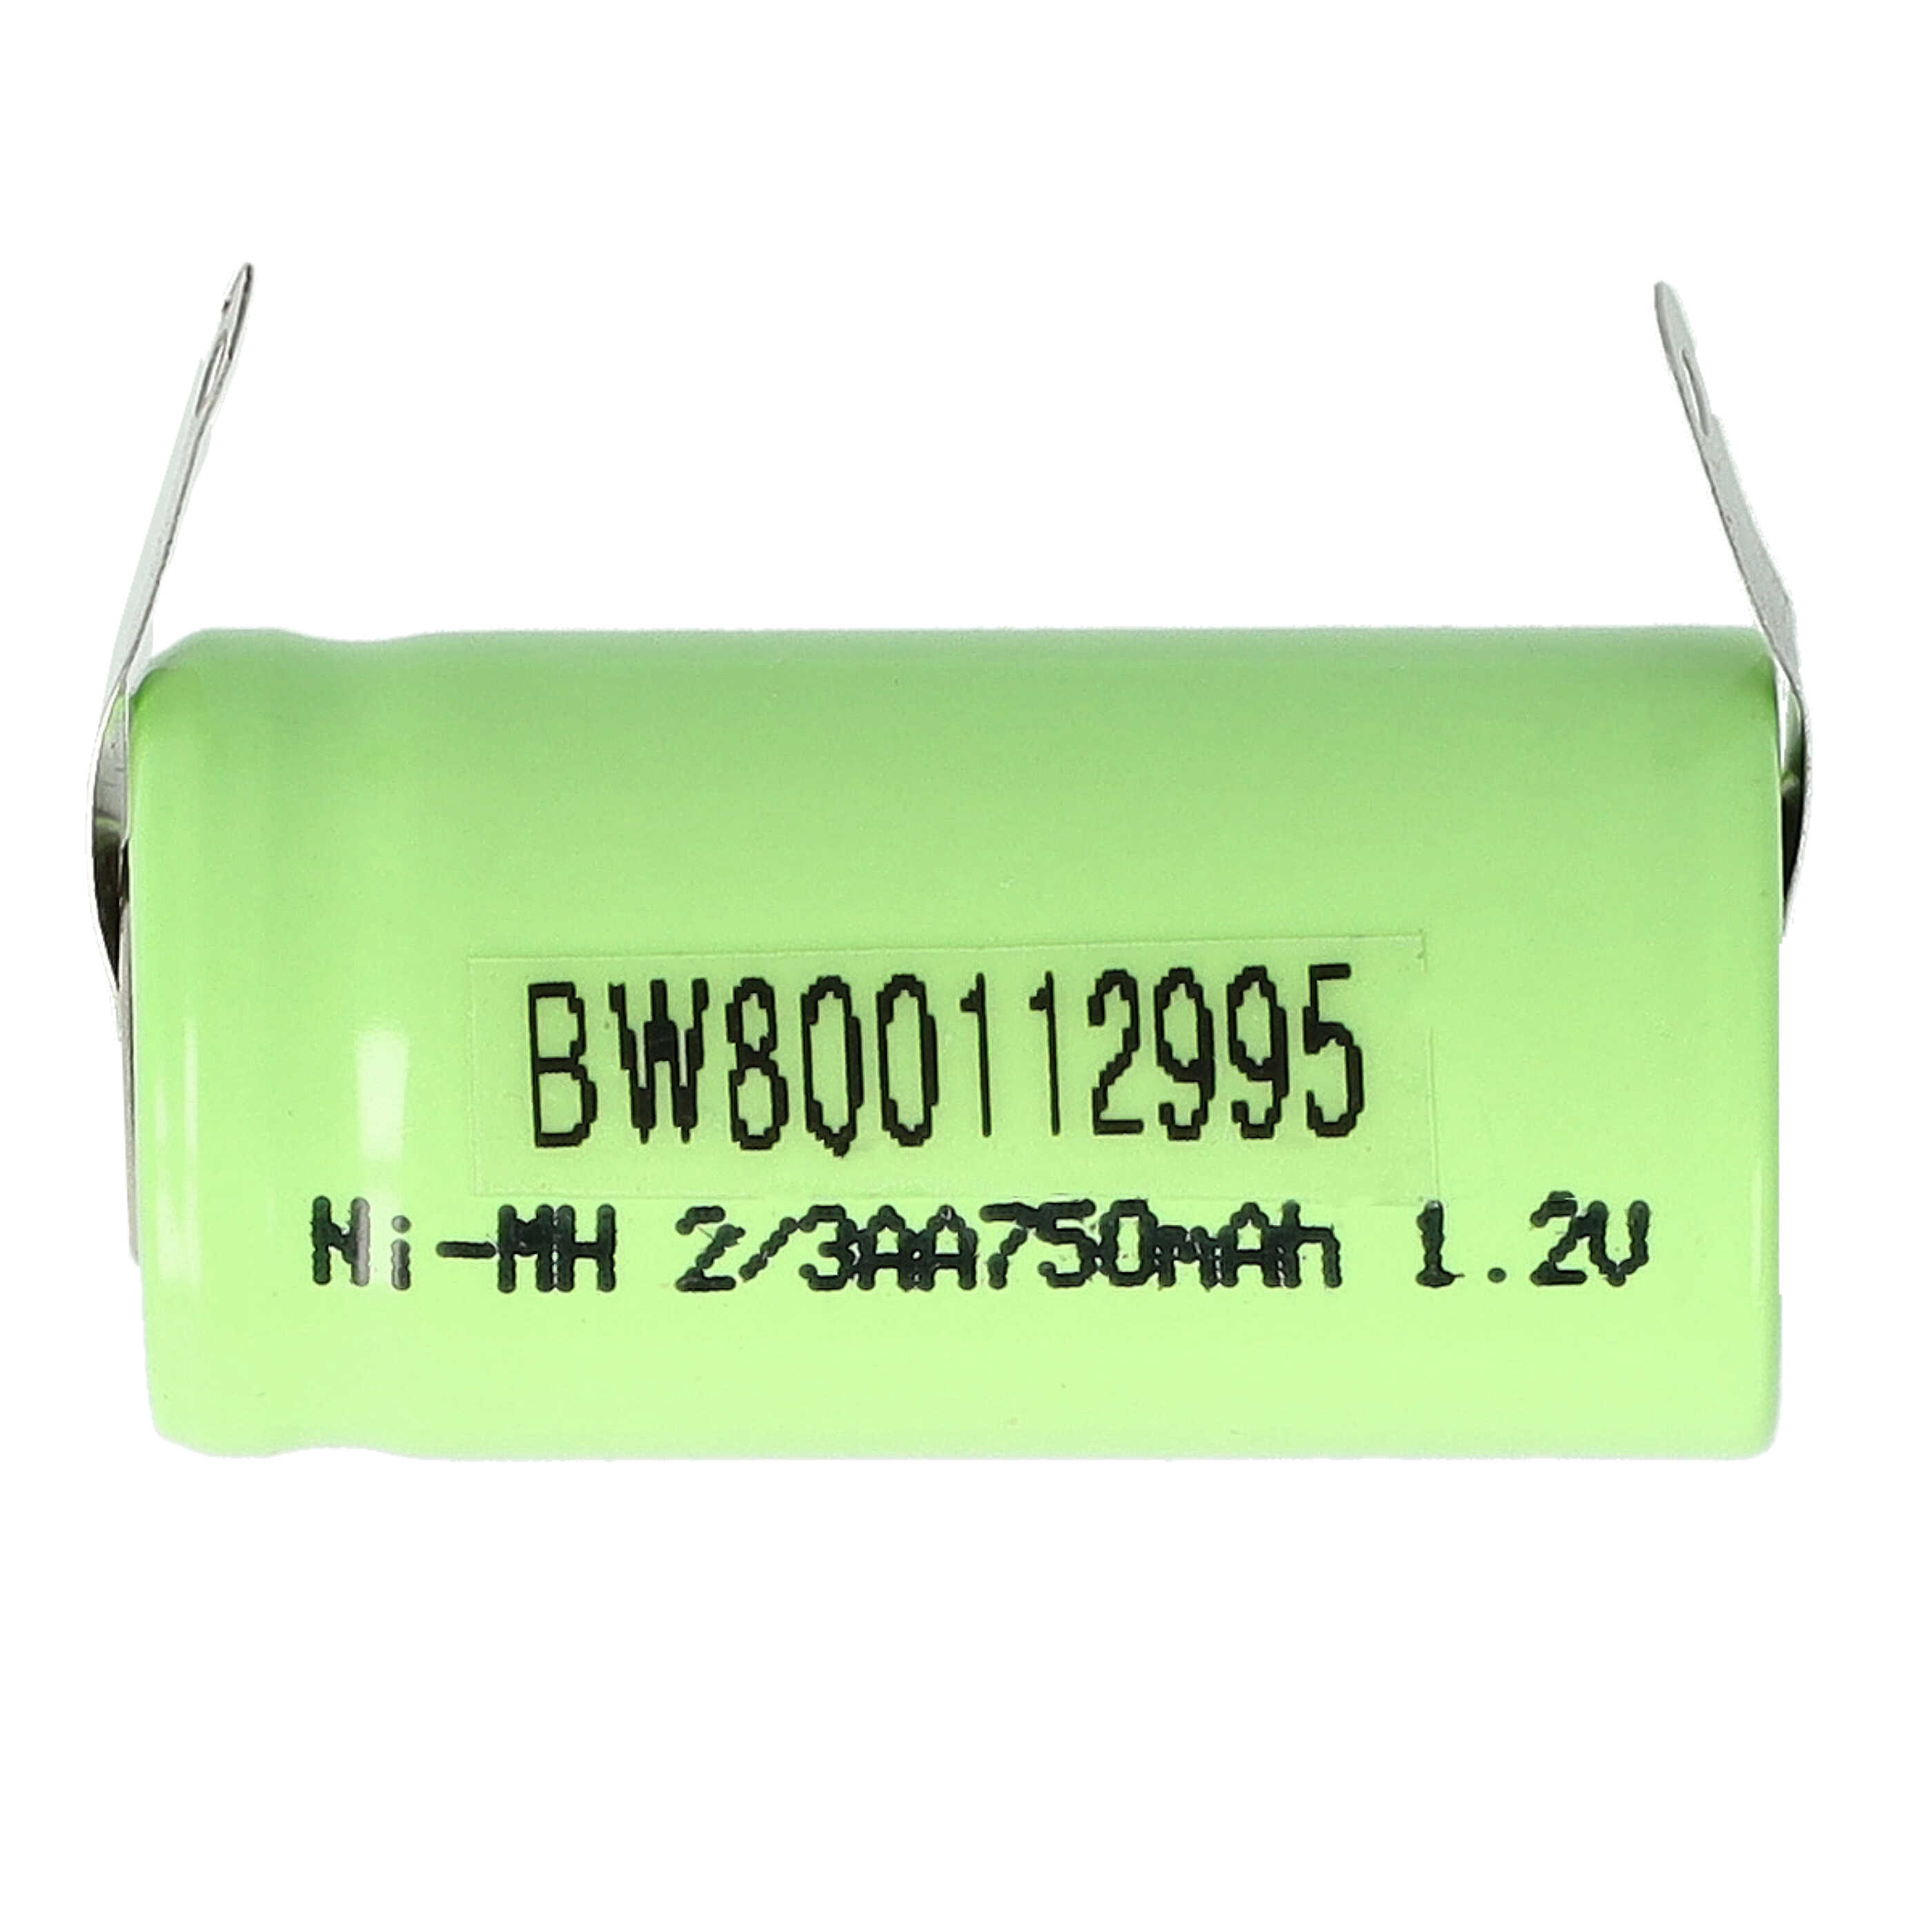 Model Making Device Battery Replacement for 2/3AA - 750mAh 1.2V NiMH